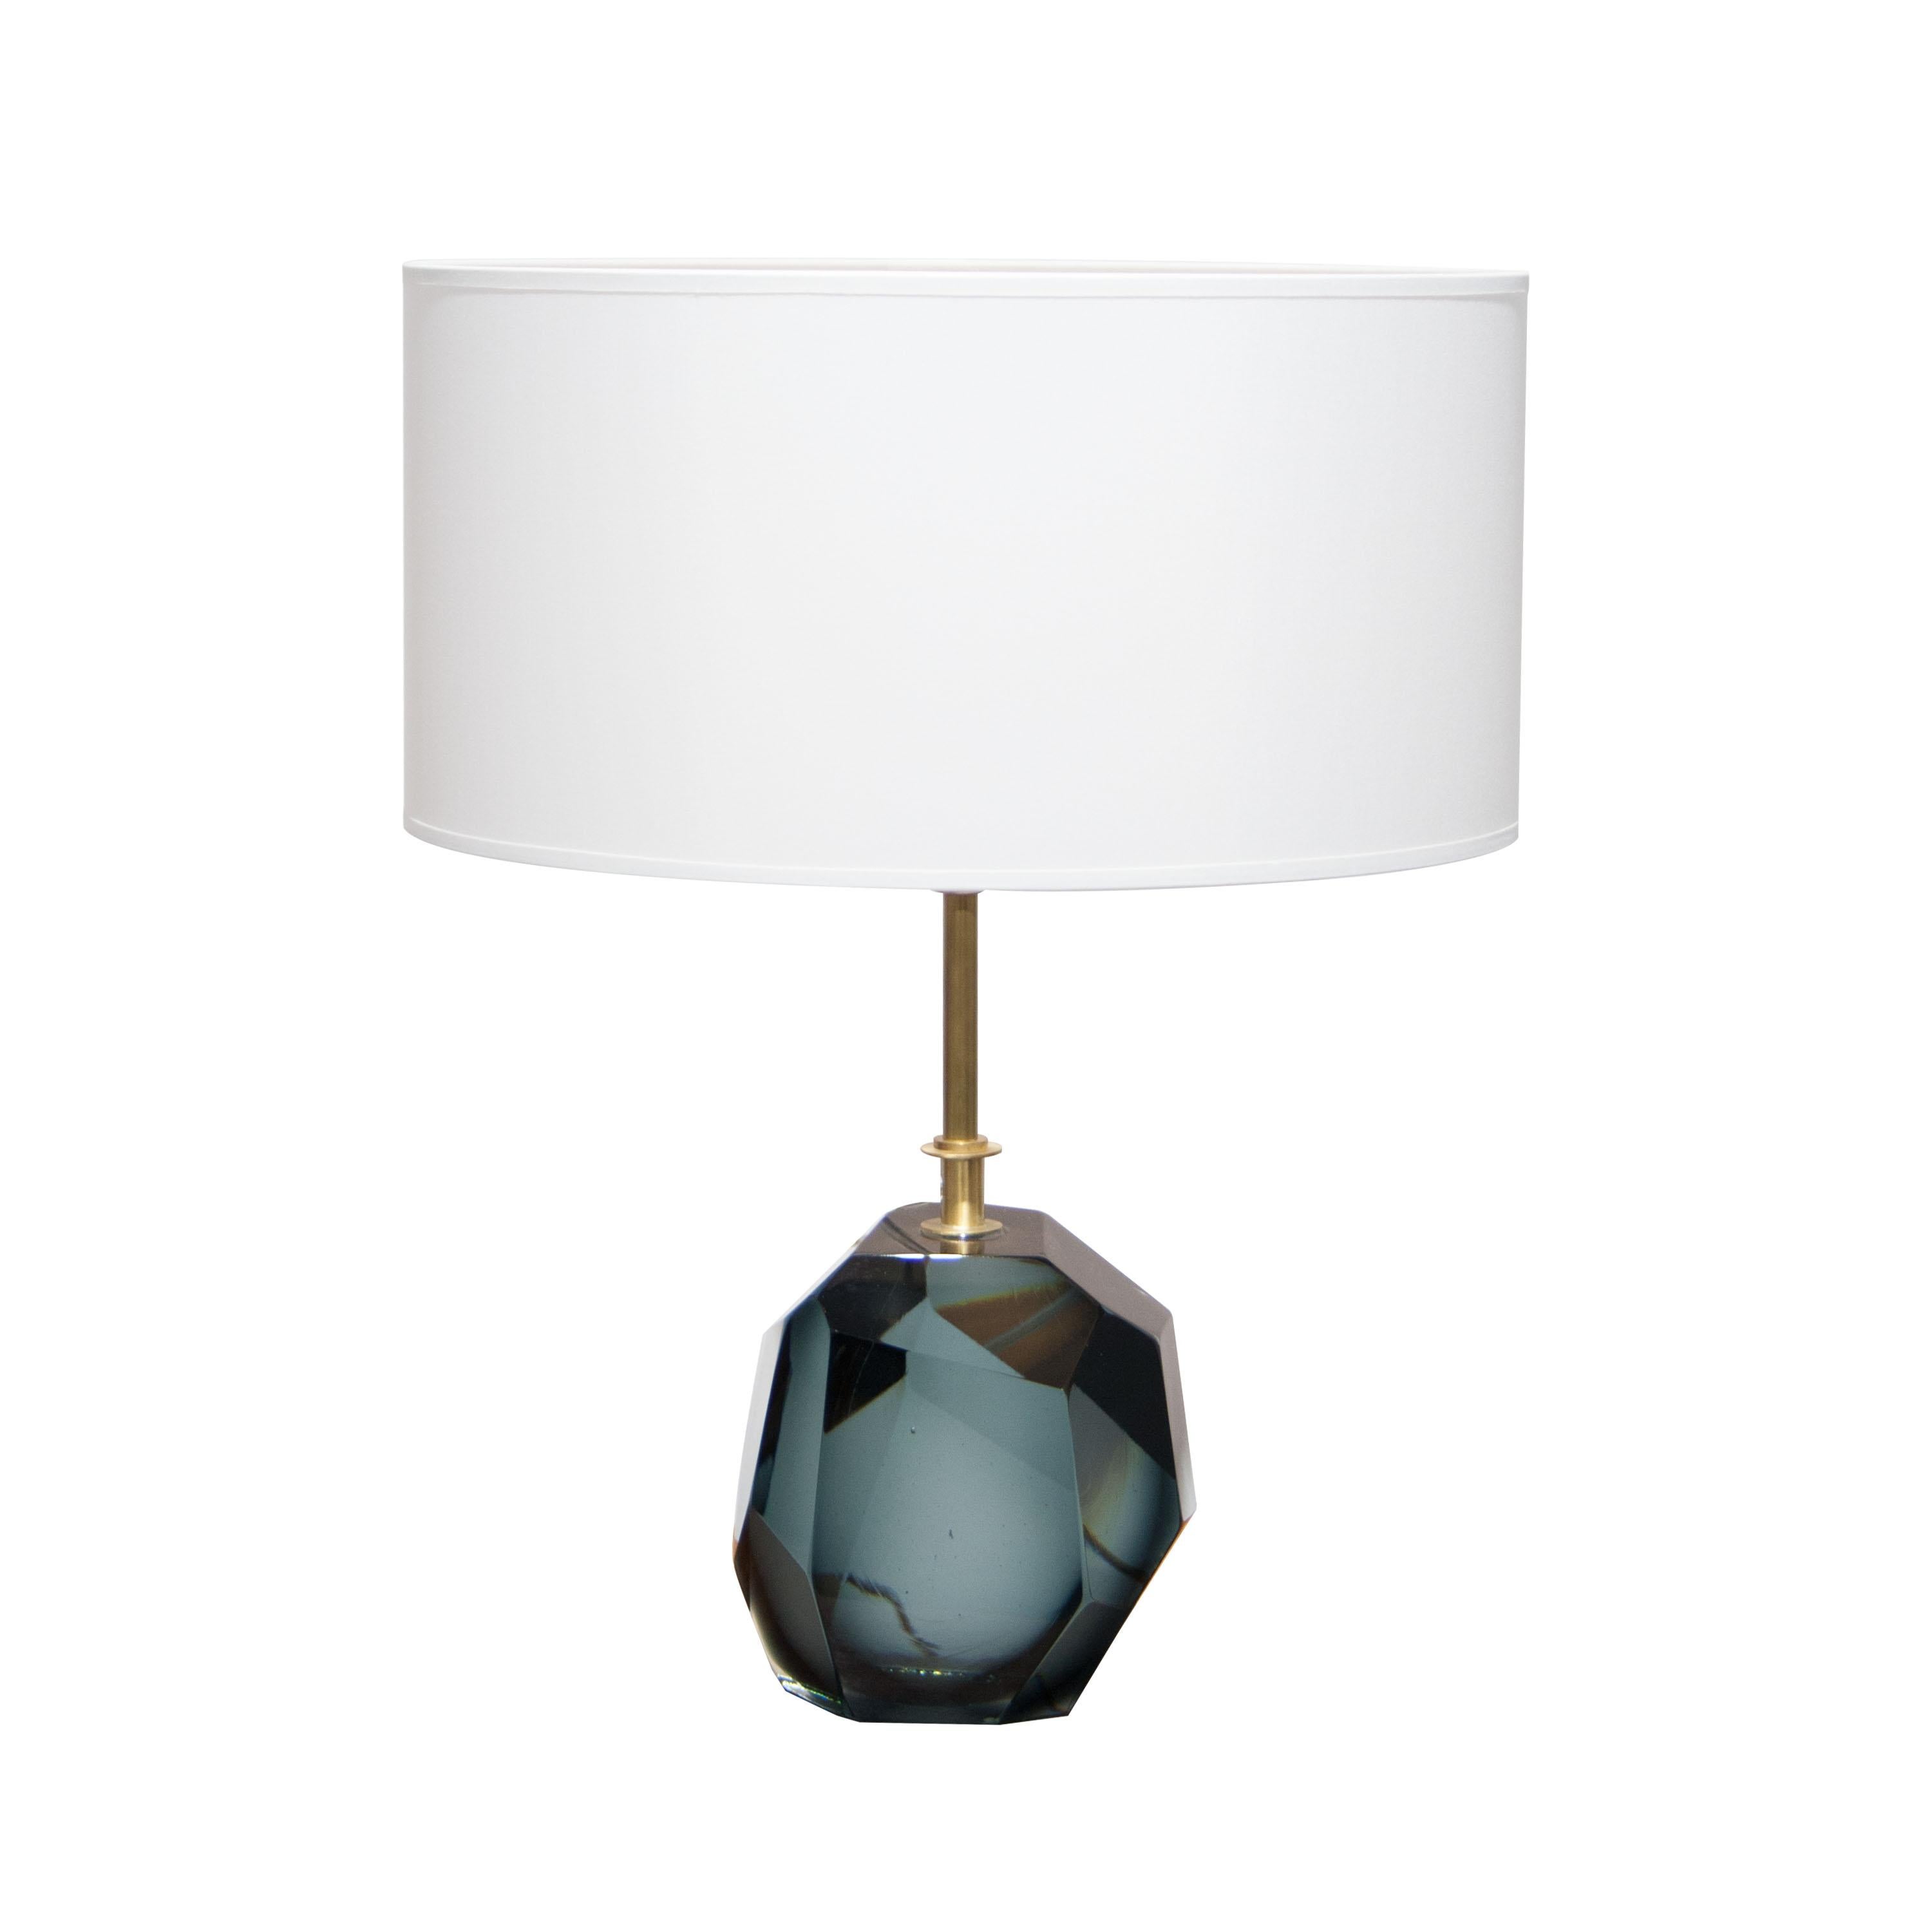 Pair of table lamps with Murano faceted glass in translucent grey and brass stem made by hand.